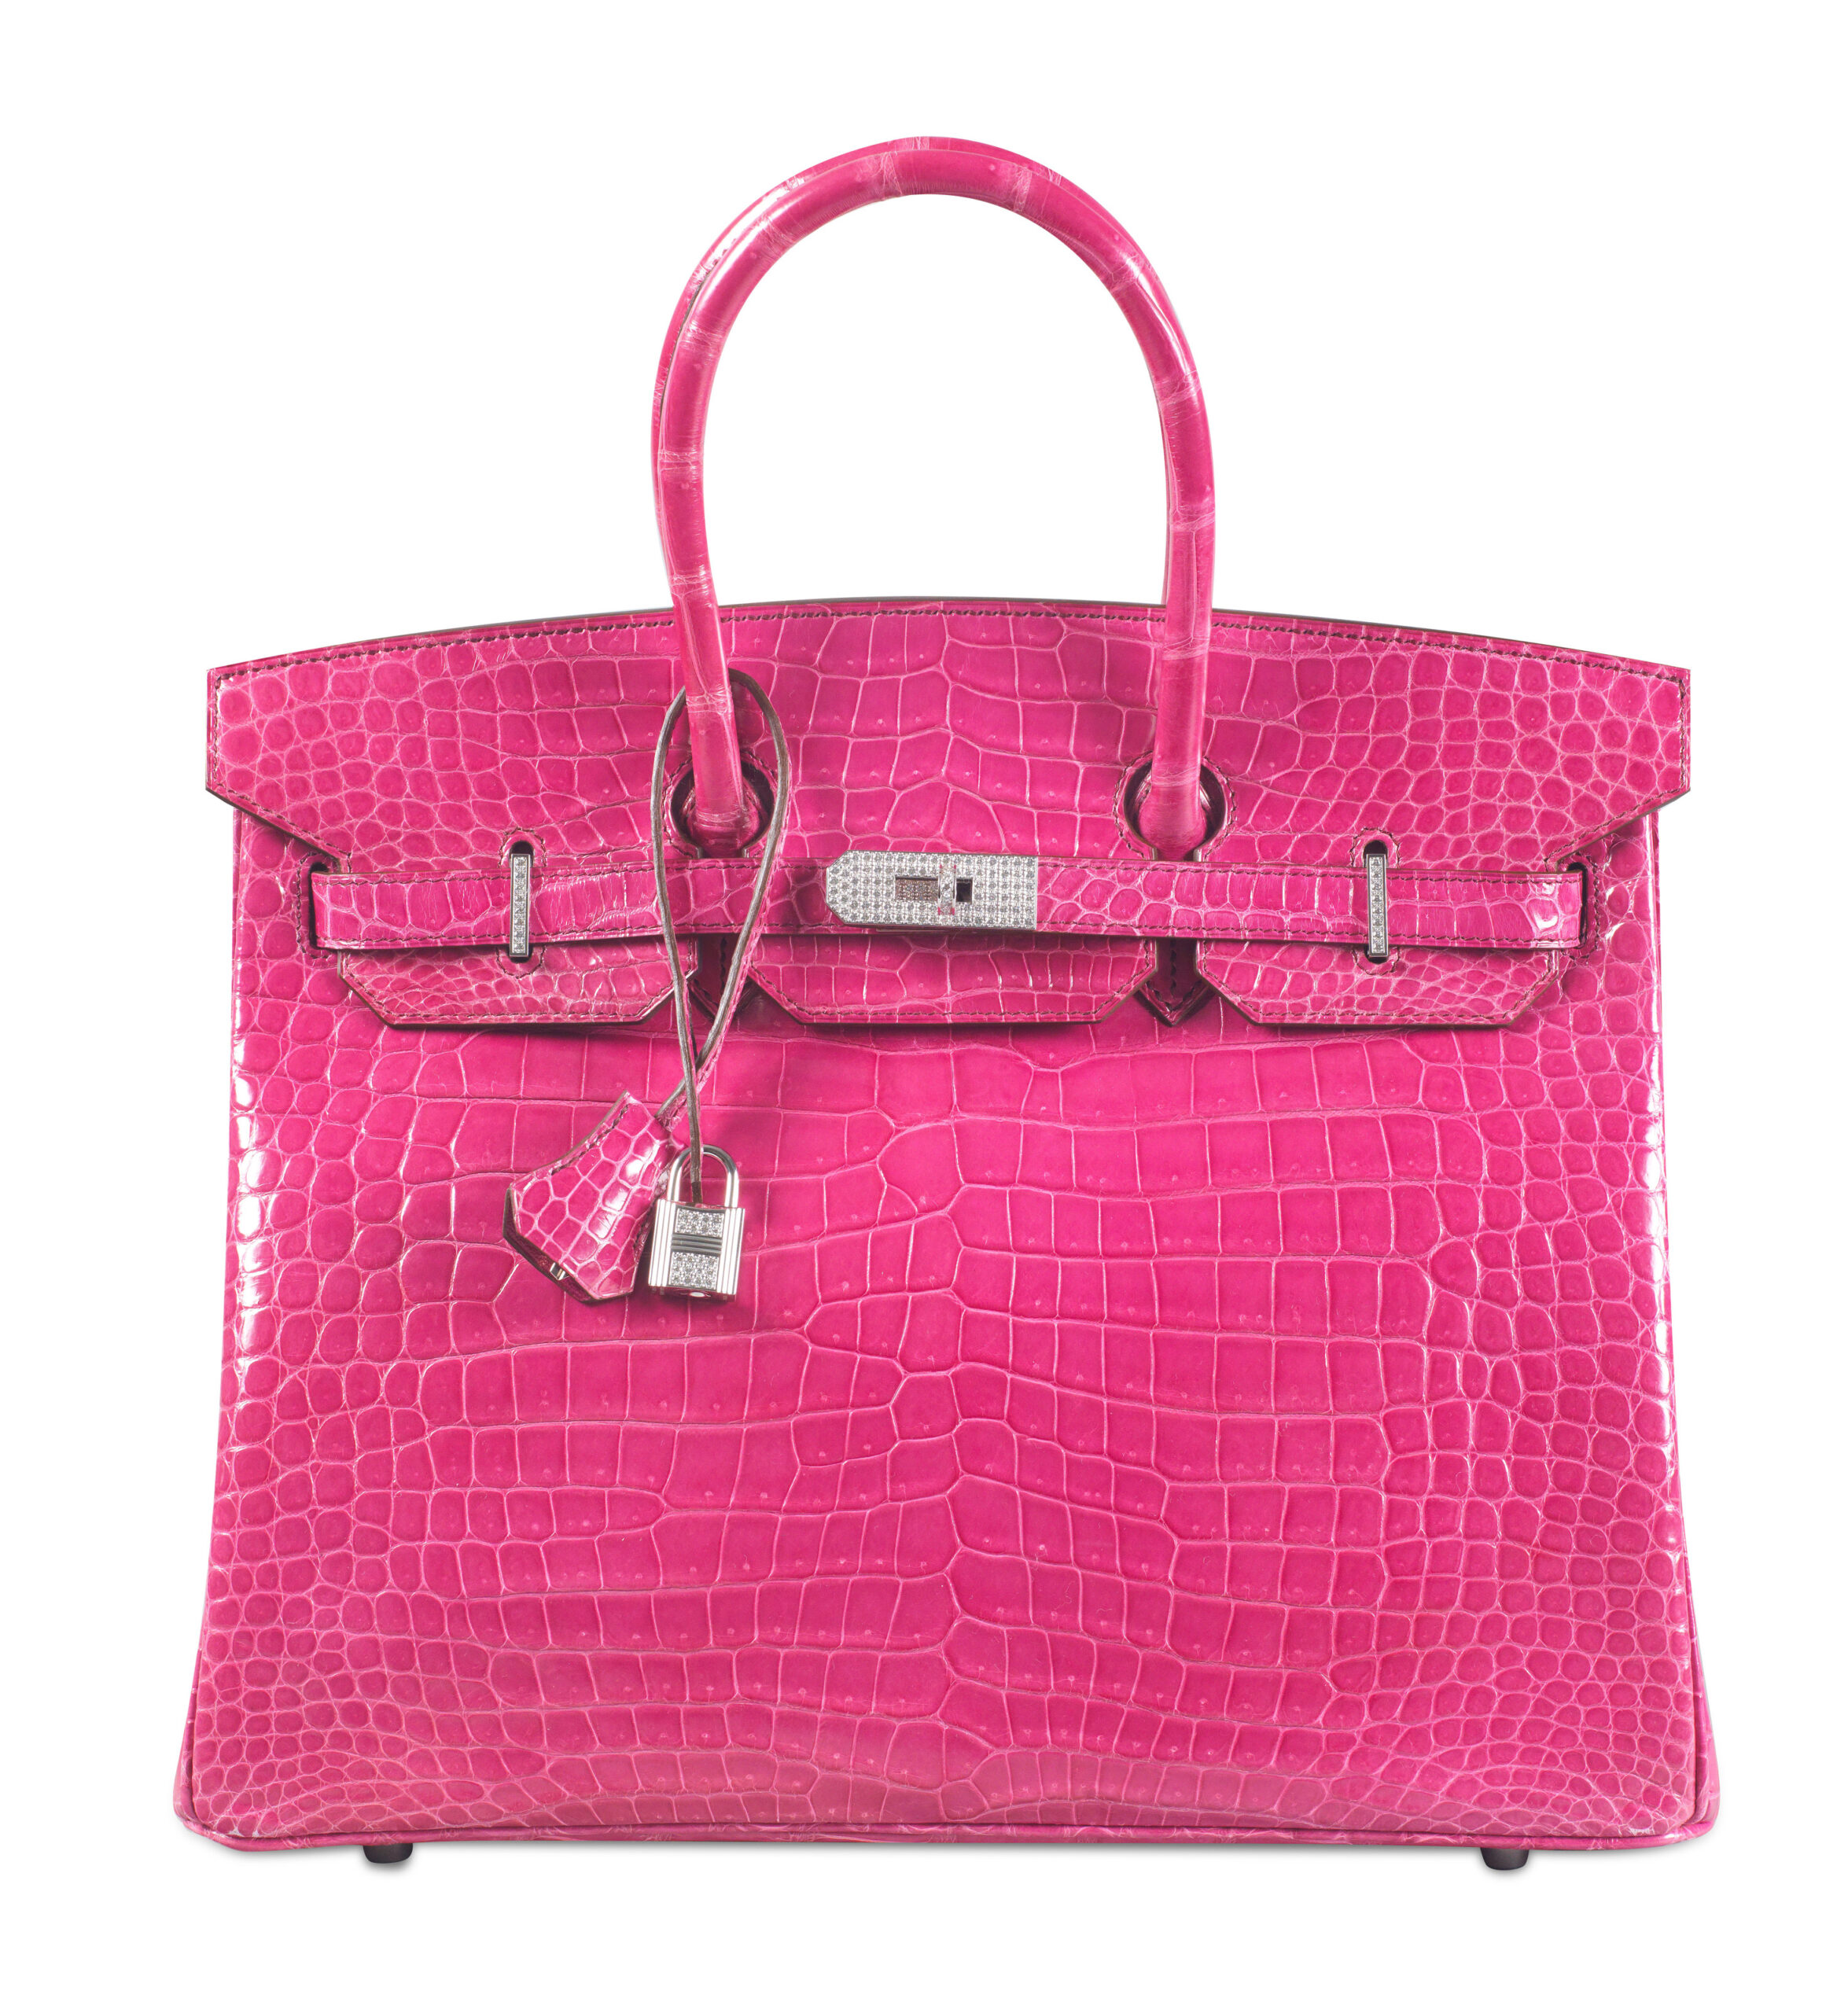 Why the Hermès Birkin Bag is Worth the Investment